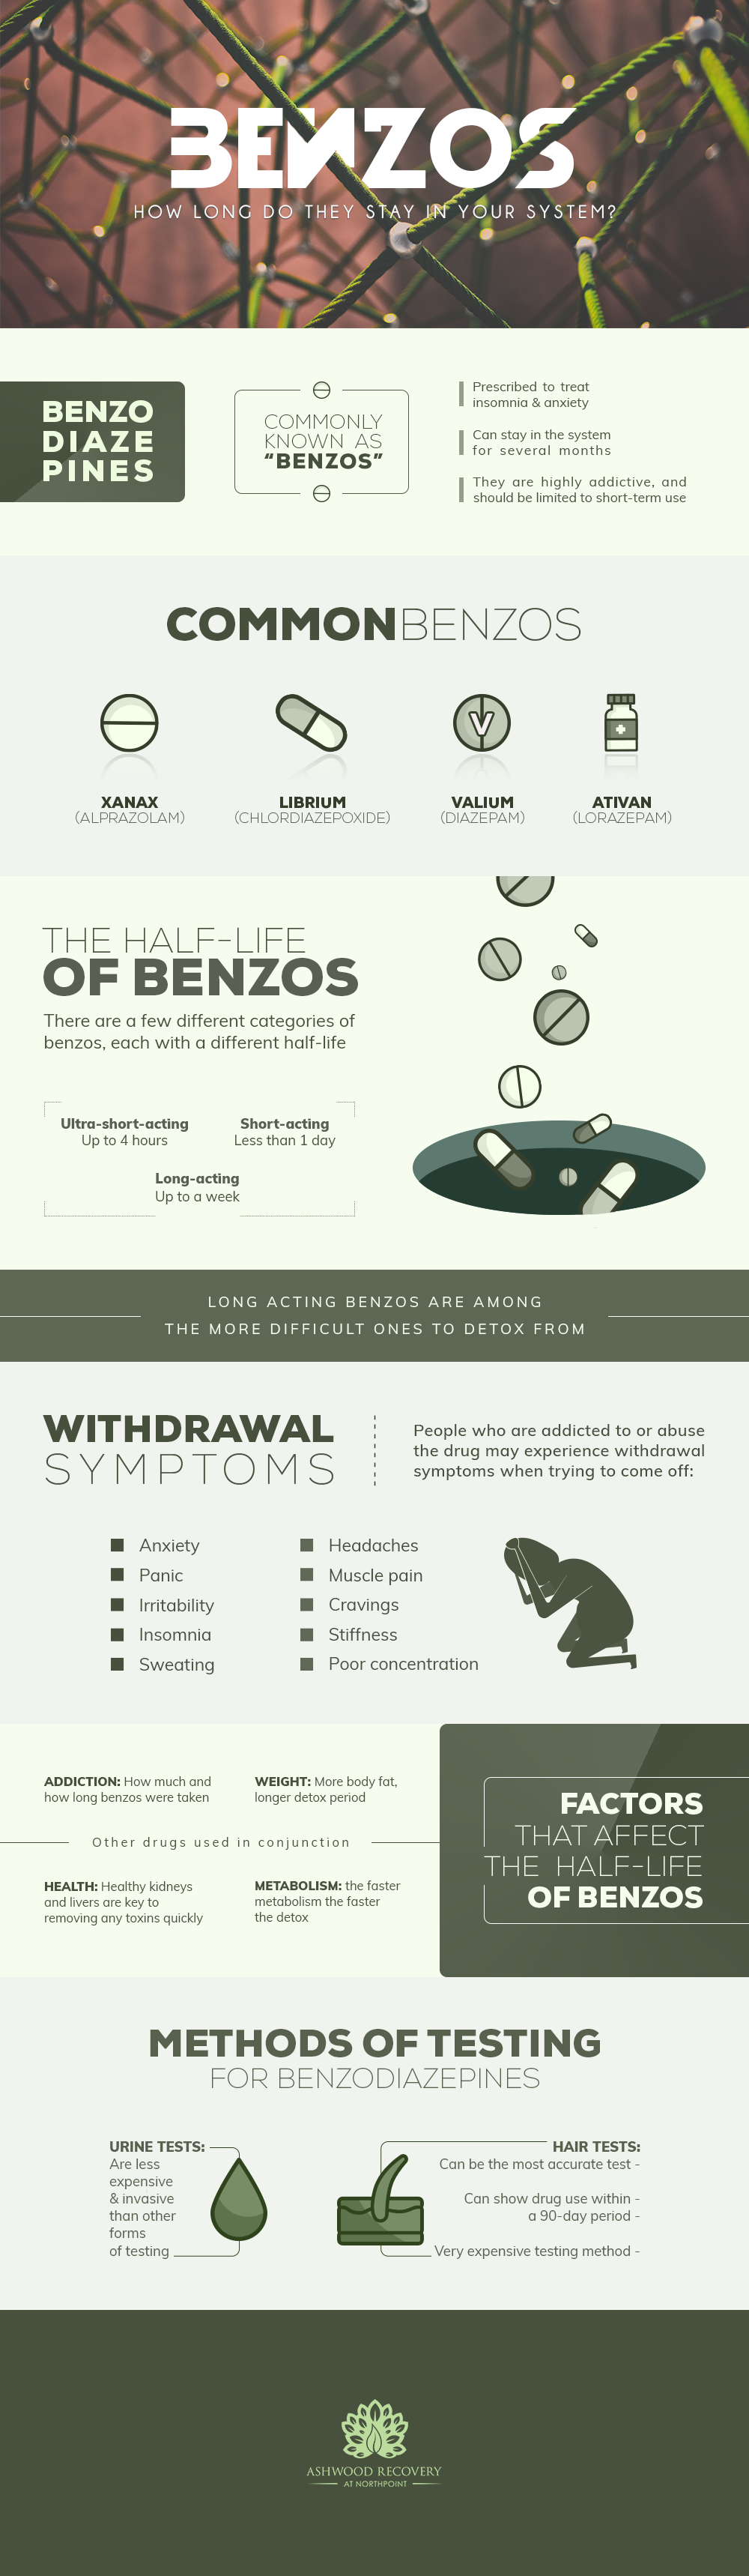 Benzos, how long do they stay in your system?. Benzodiazepines are commonly known as benzos, they are prescribed to treat insomnia and anxiety, they can stay in the system for several months and they are highly addictive, and should be limited to short term use. Common benzos are xanax, librium, valium and ativan. There are a few different categories of benzos, each with a different half life. some benzodiazepines are ultra short acting which means they act up to 4 hours, there are others which are short acting which means they act in less than 1 day and there are long acting benzodiazepines which acts in up to a week. Long acting benzos are among the more difficult ones to detox from. People who are addicted to or abuse benzodiazepines drugs may experience withdrawal symptoms when trying to come off these symptoms includes anxiety, panic, irritability, insomnia, sweating, headaches, muscle pain, cravings, stiffness and poor concentration. The factors that affect the half life of benzos are the addiction which determines how much and how long benzos were taken, then is the weight in which more body fat means longer detox period. Health kidneys and livers are key to removing any toxins quickly. The faster metabolism the faster the detox. Urine tests are one of the methods of testing for benzodiazepines, urine tests are less expensive and invasive than other forms of testing. Hair tests are another method of testing for benzodiazepines, hair tests can be the most accurate kind test, they can show drug use within a 90 day period and they are very expensive testing method